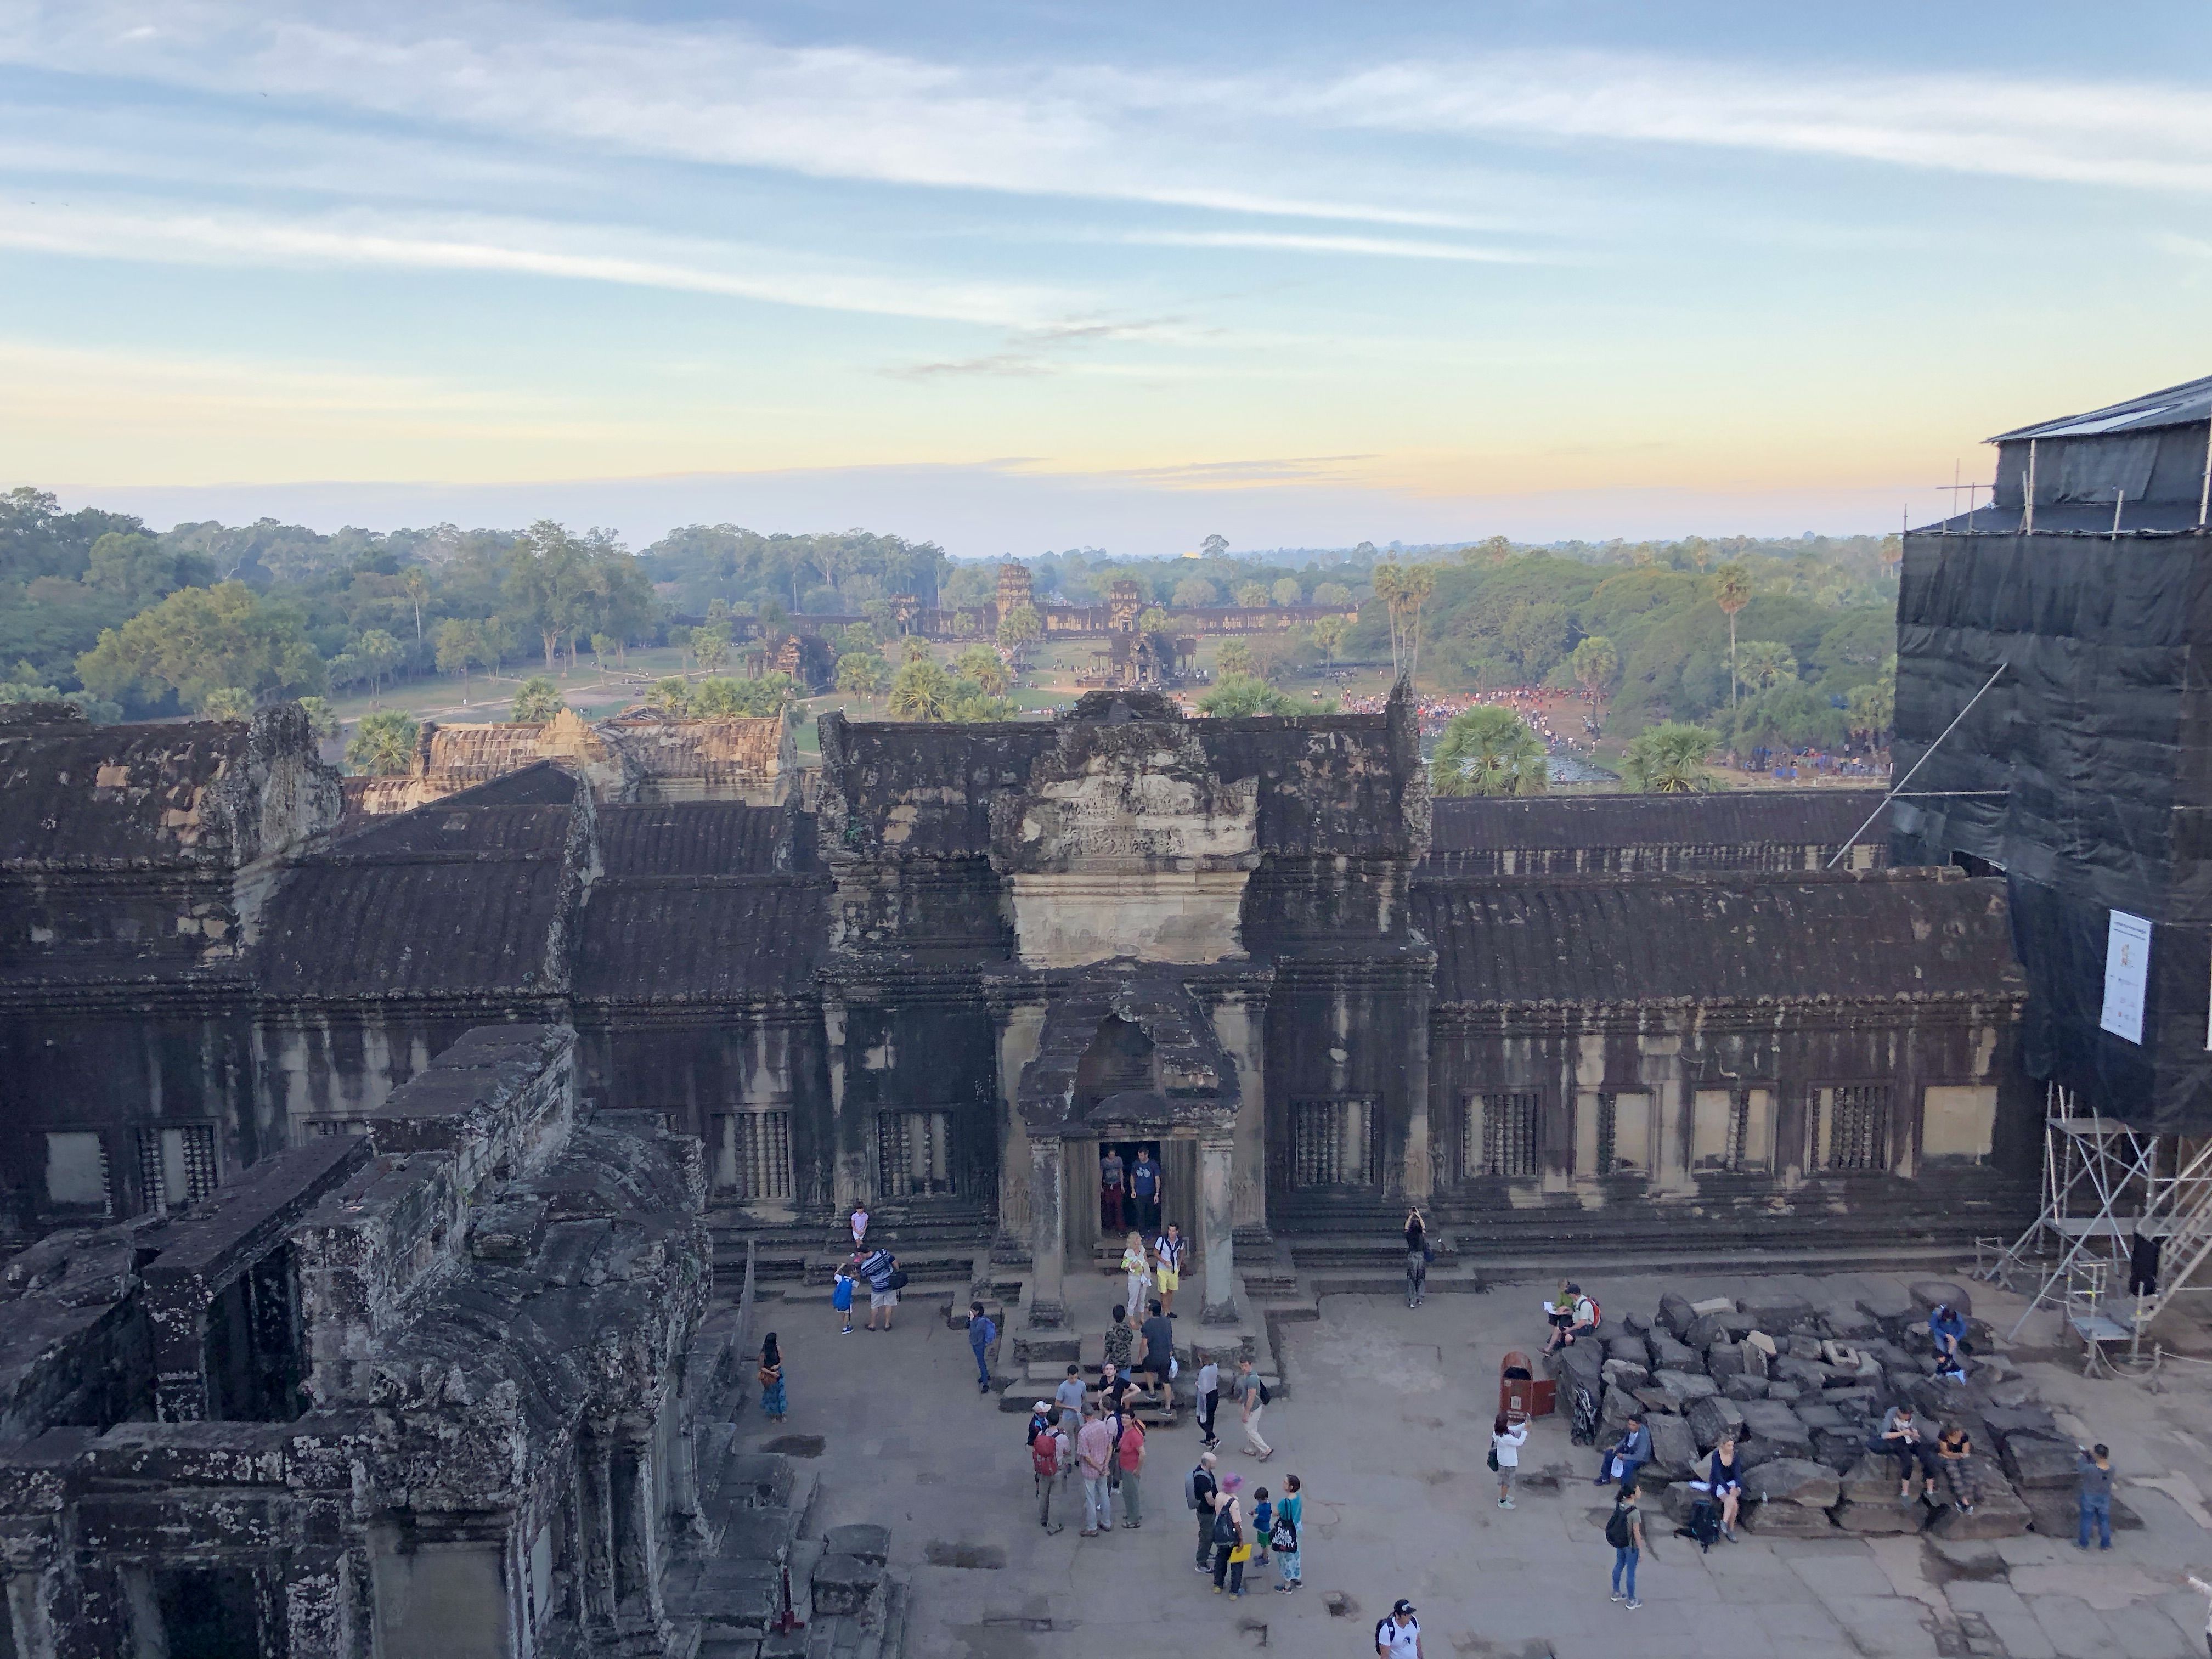 Looking out at a courtyard in Angkor Wat. The wall facing us has a  door flanked with pillars. There are tourists milling round. More sandstone structures are visible in the distance.